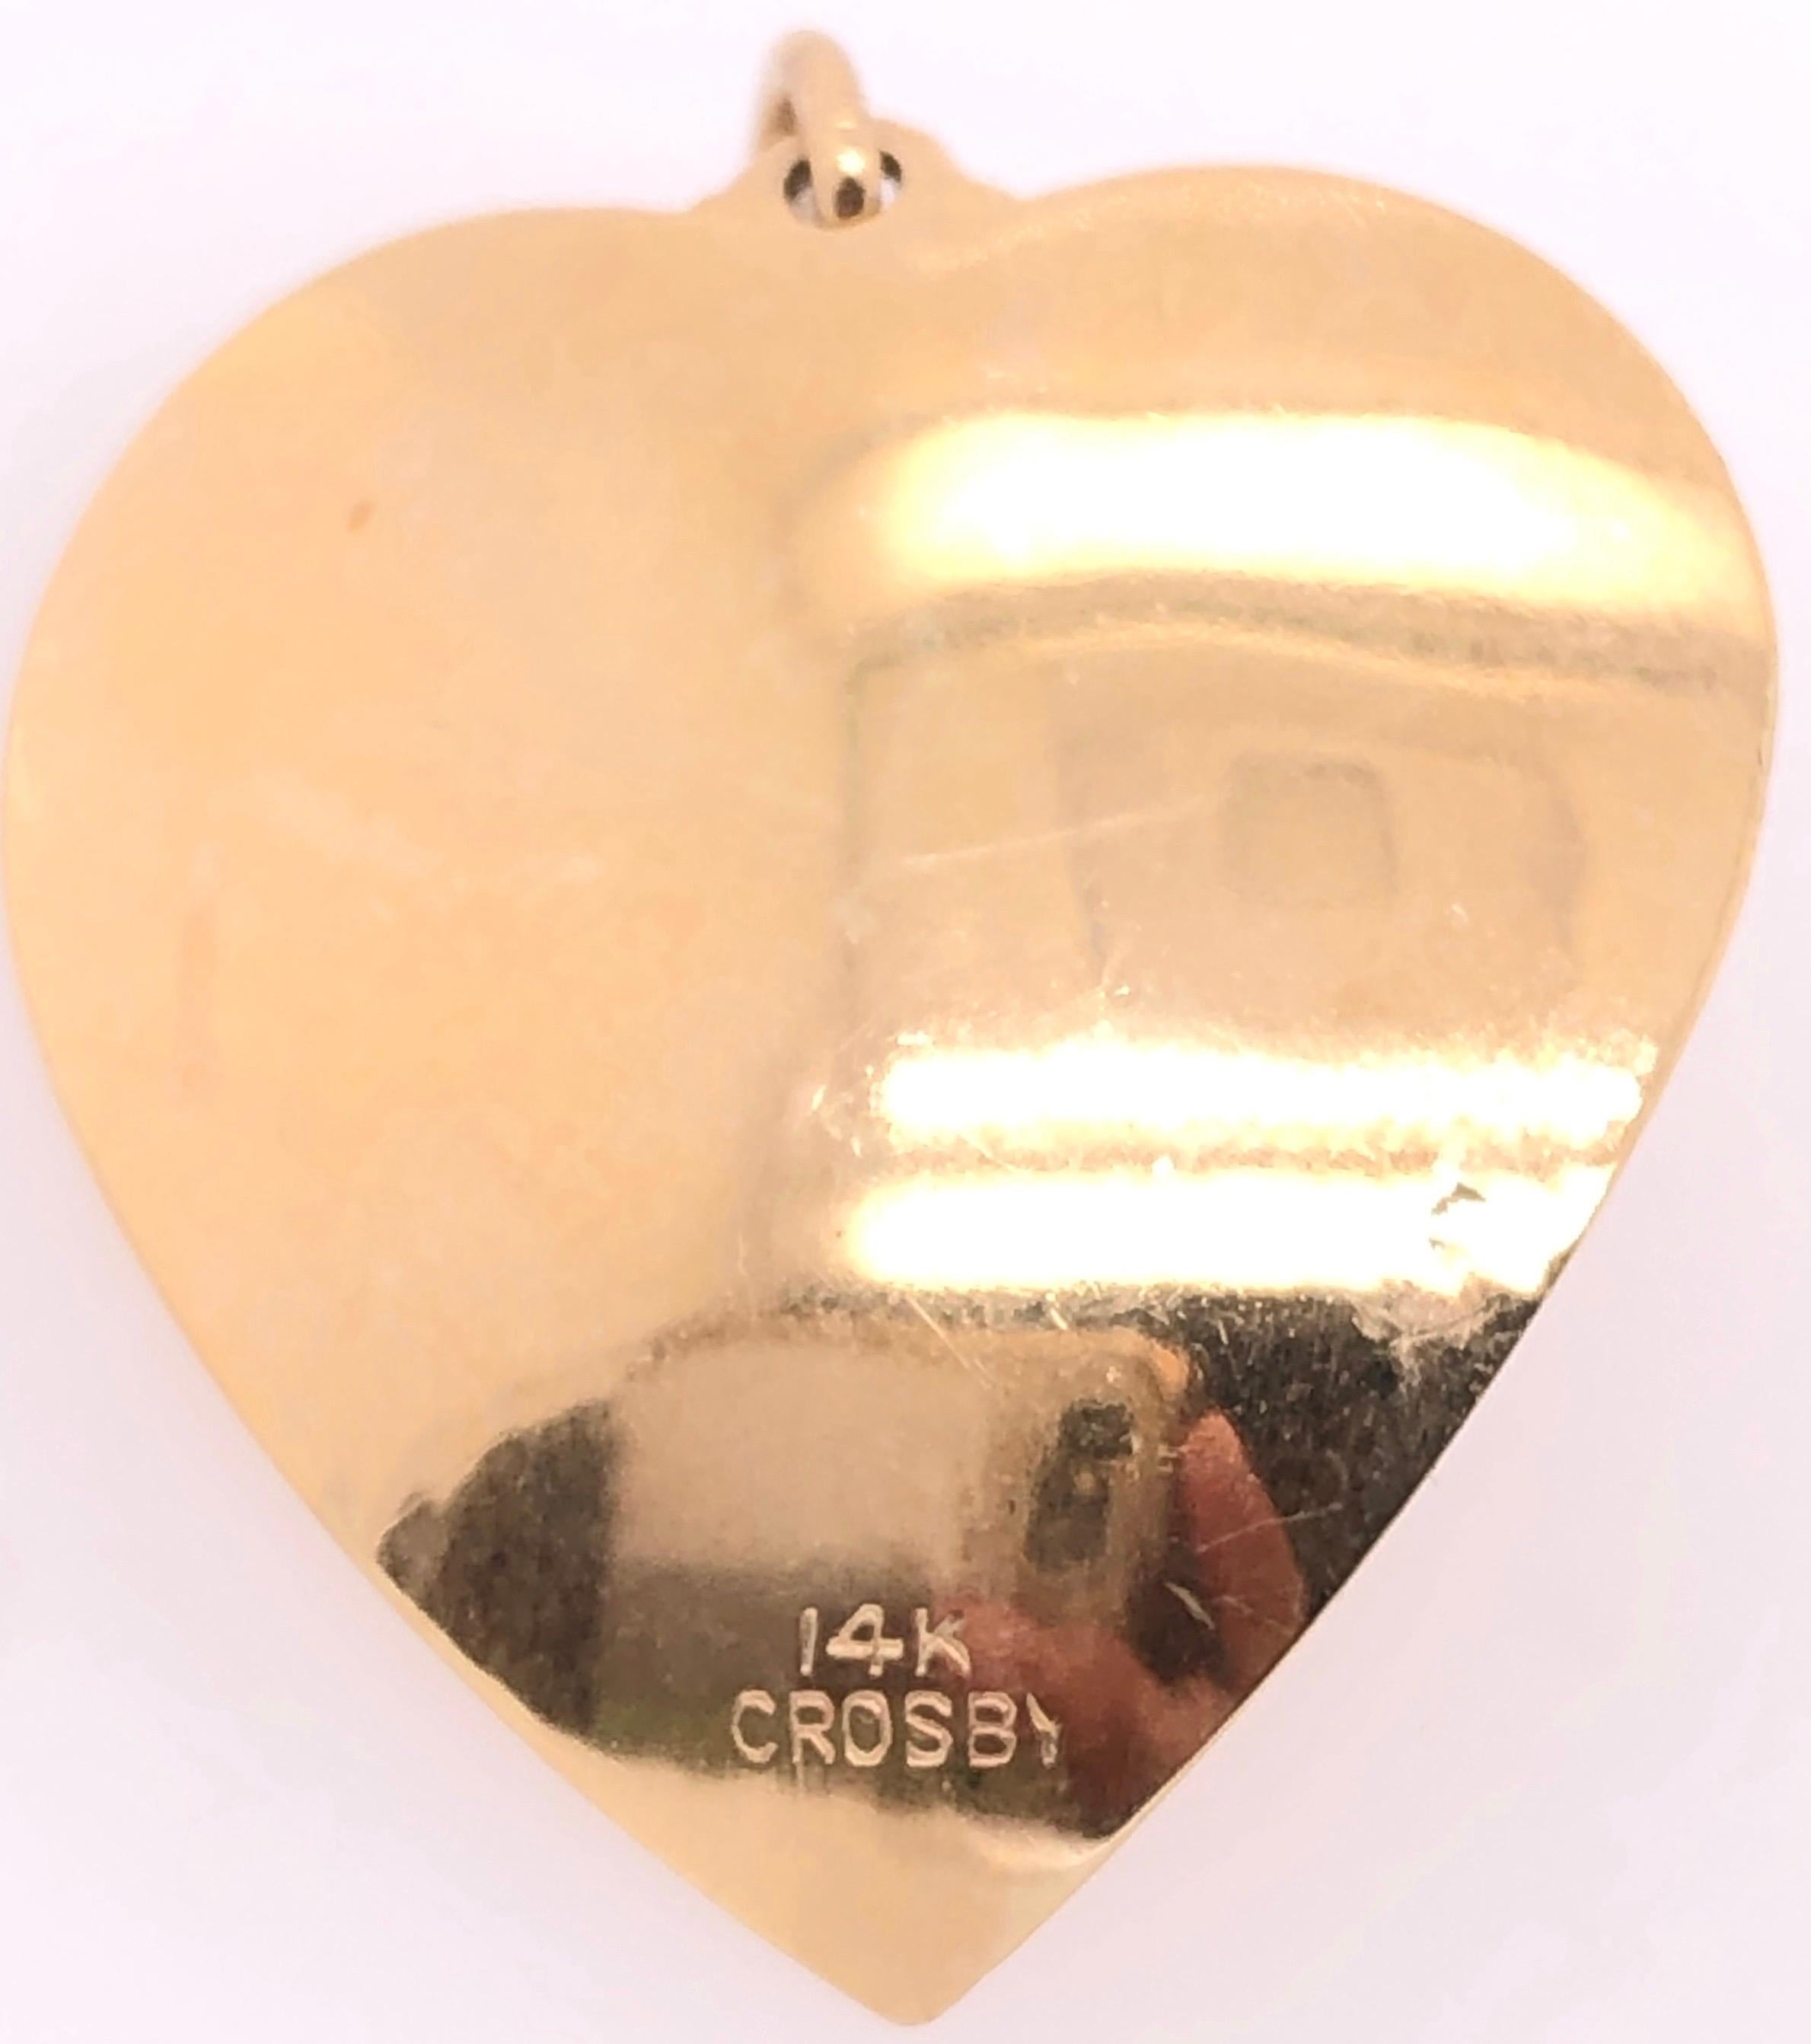 14 Karat Yellow Gold Heart Pendant with Pearl.
3.55 grams total weight.